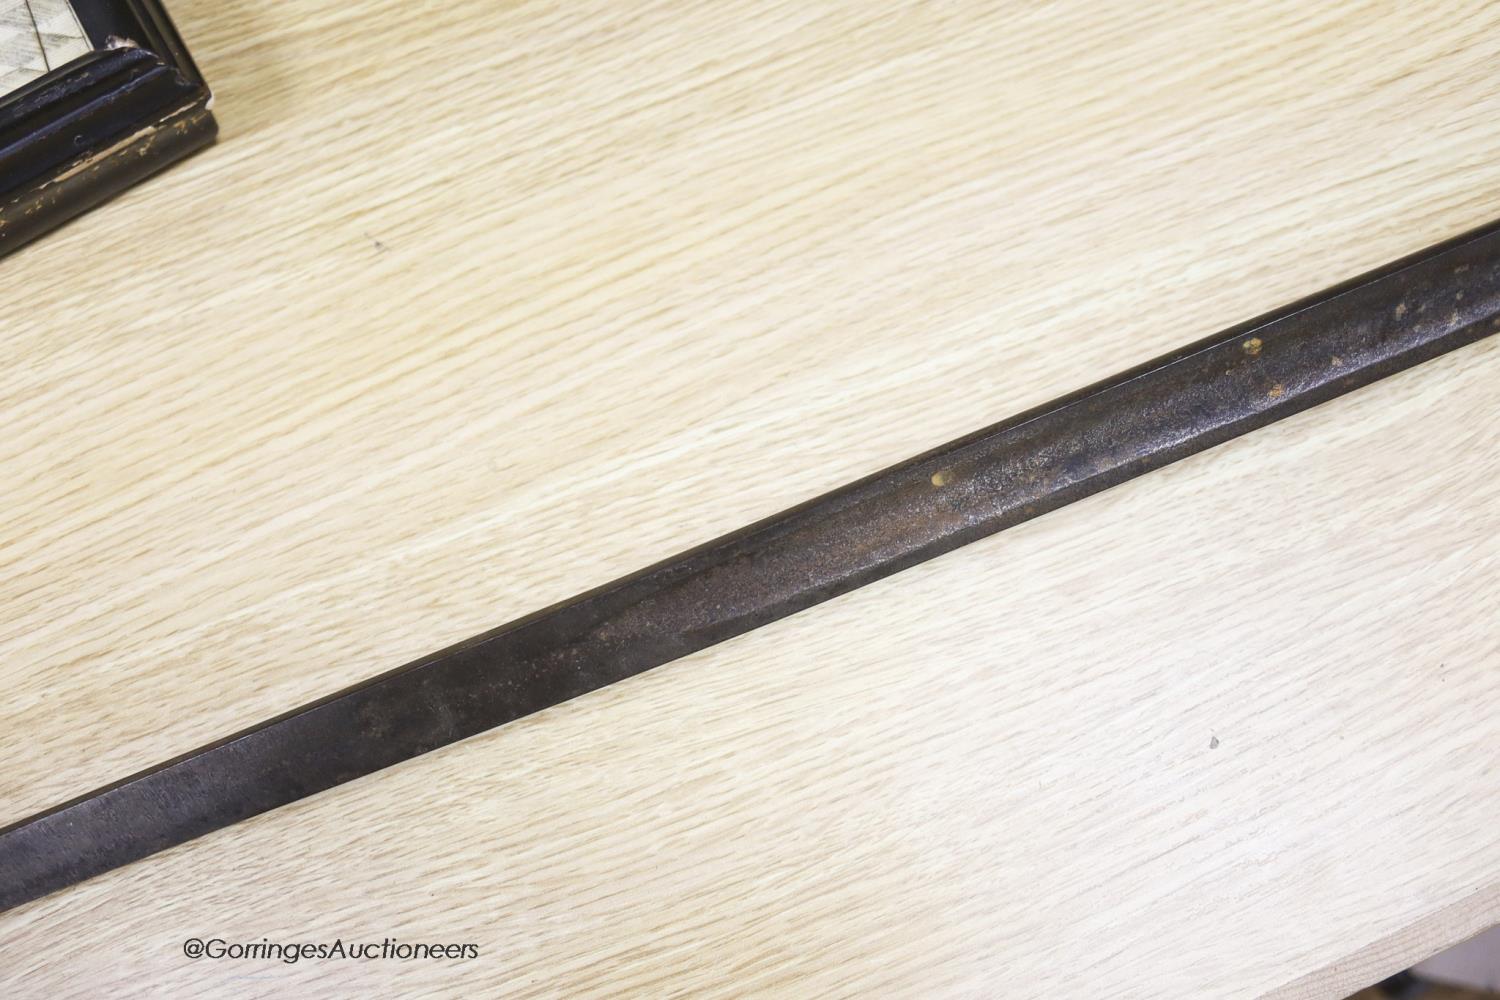 An 18th century style cup hilted sword, length 102cm - Image 4 of 5